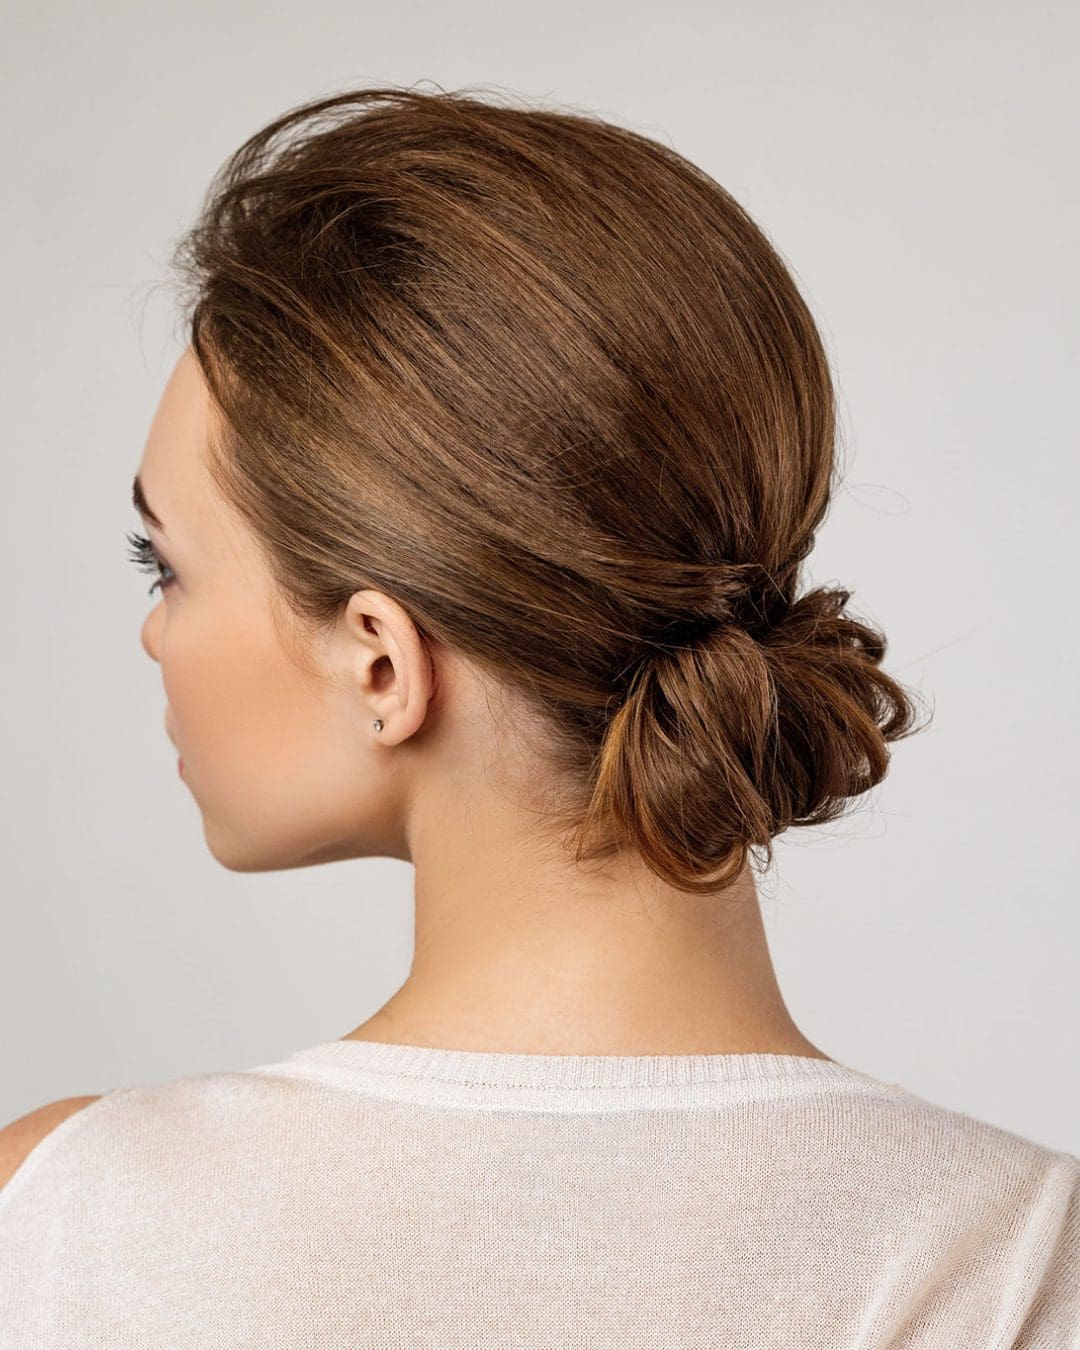 10 Mid-Length Hairstyles to Wear to All Your Summer Events - Brit + Co